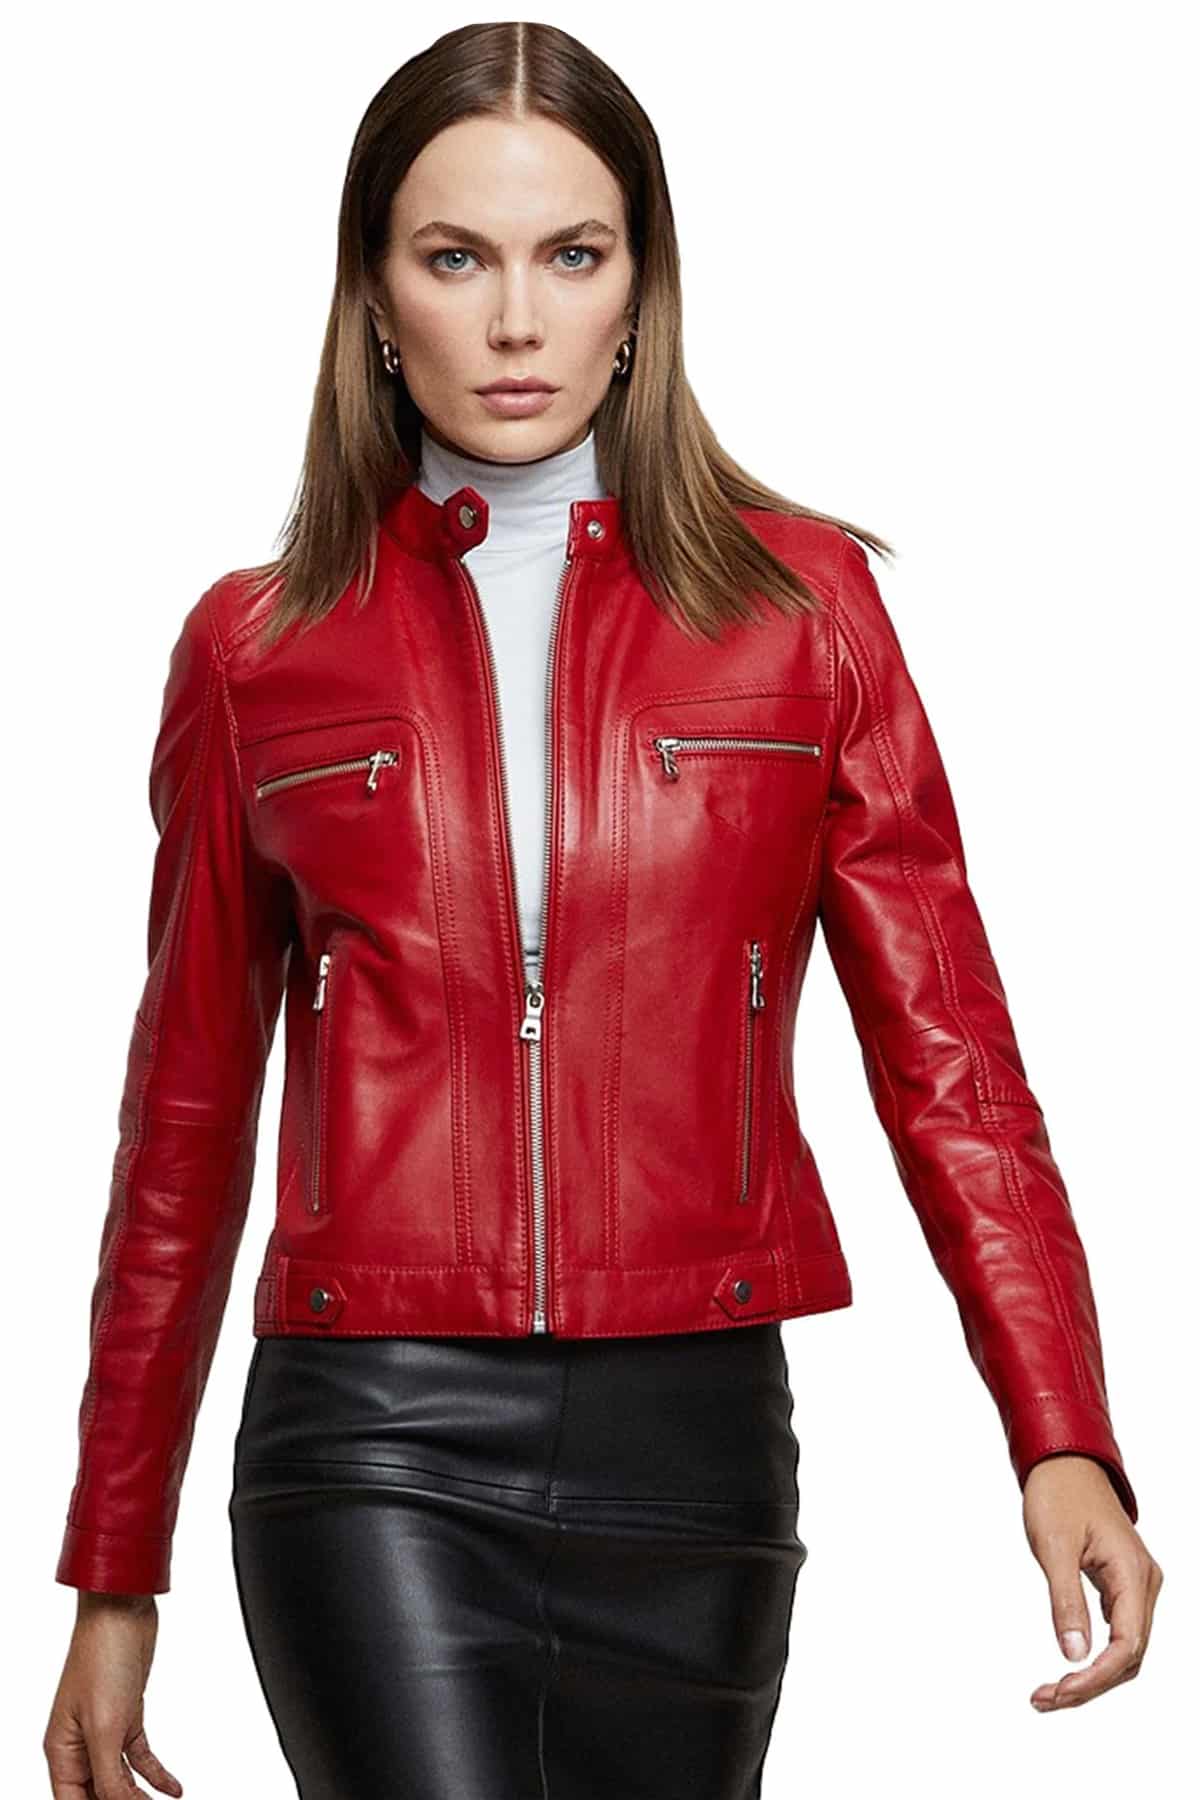 Evelyn Bold Red Women's Genuine Soft Lambskin Leather Cafe Racer Moto Jacket with Zippered Pockets & Sleeves